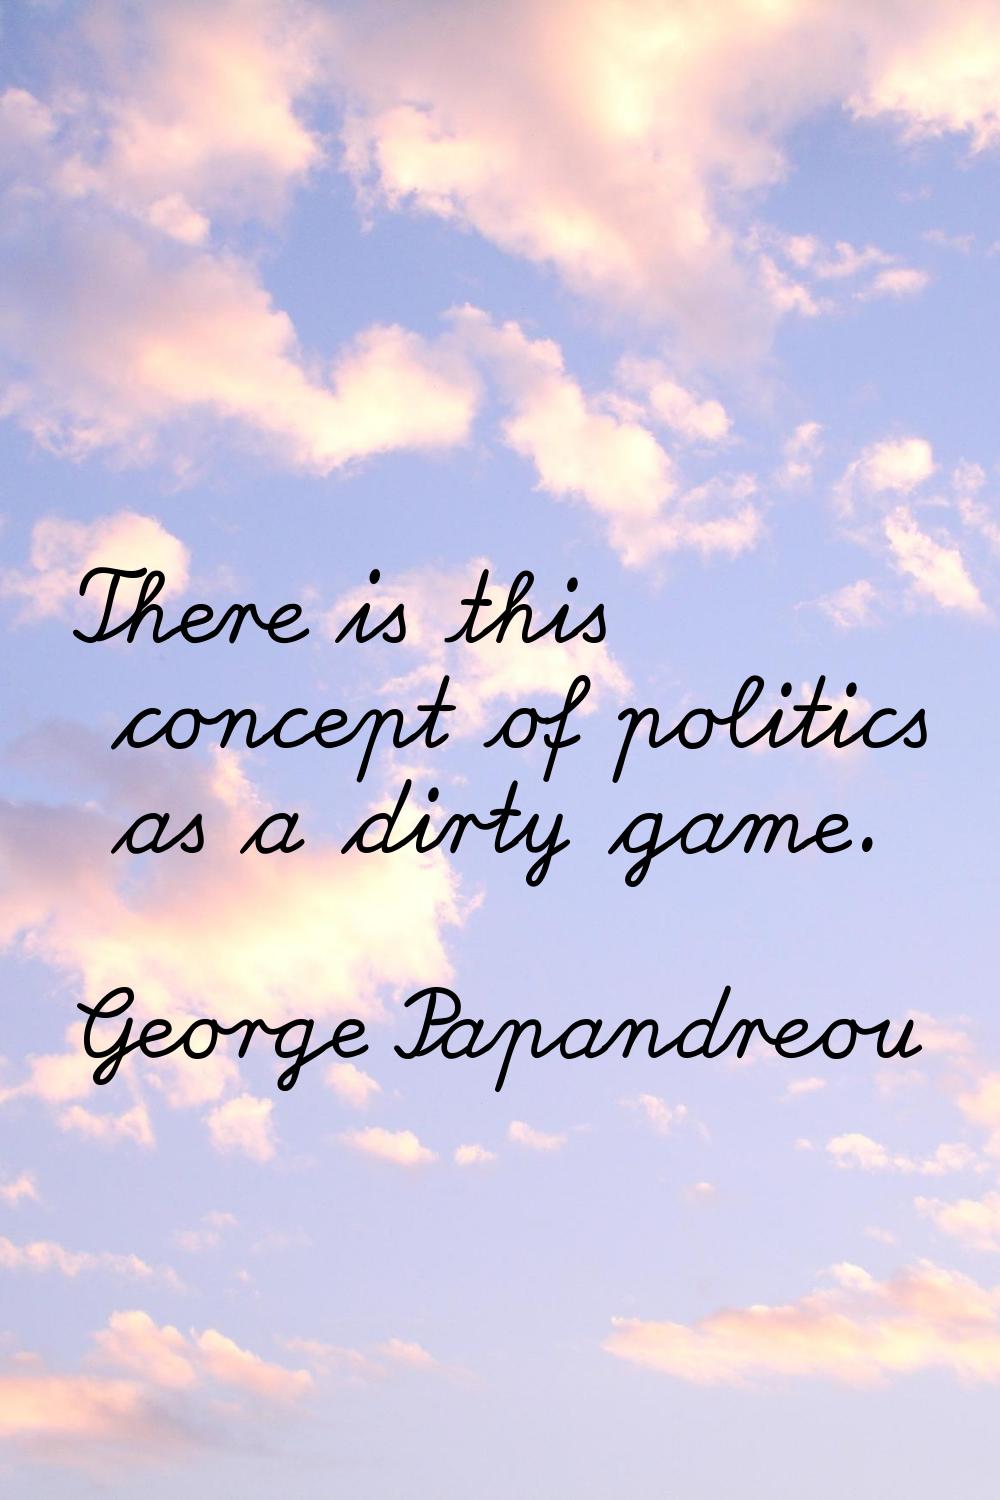 There is this concept of politics as a dirty game.